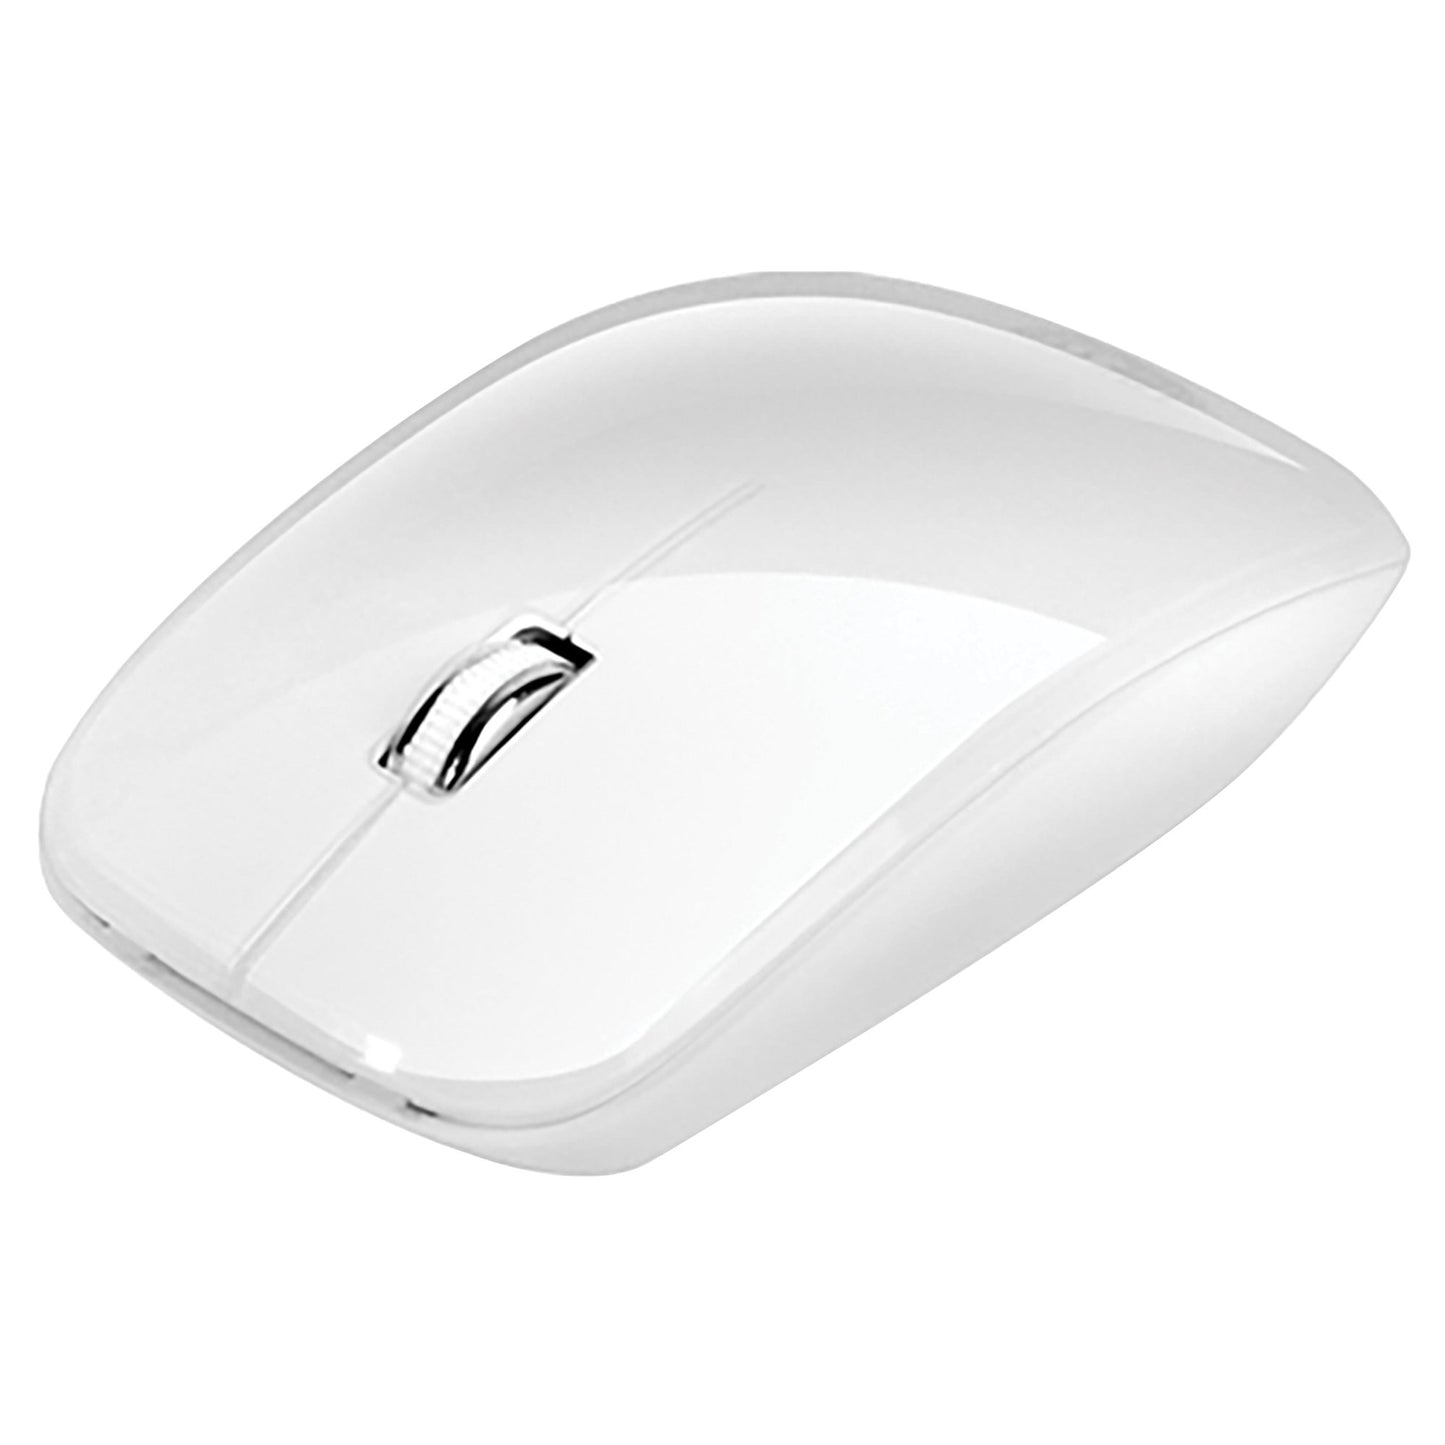 Adesso IMOUSE M300W iMouse M300W Bluetooth Optical Wireless Mouse